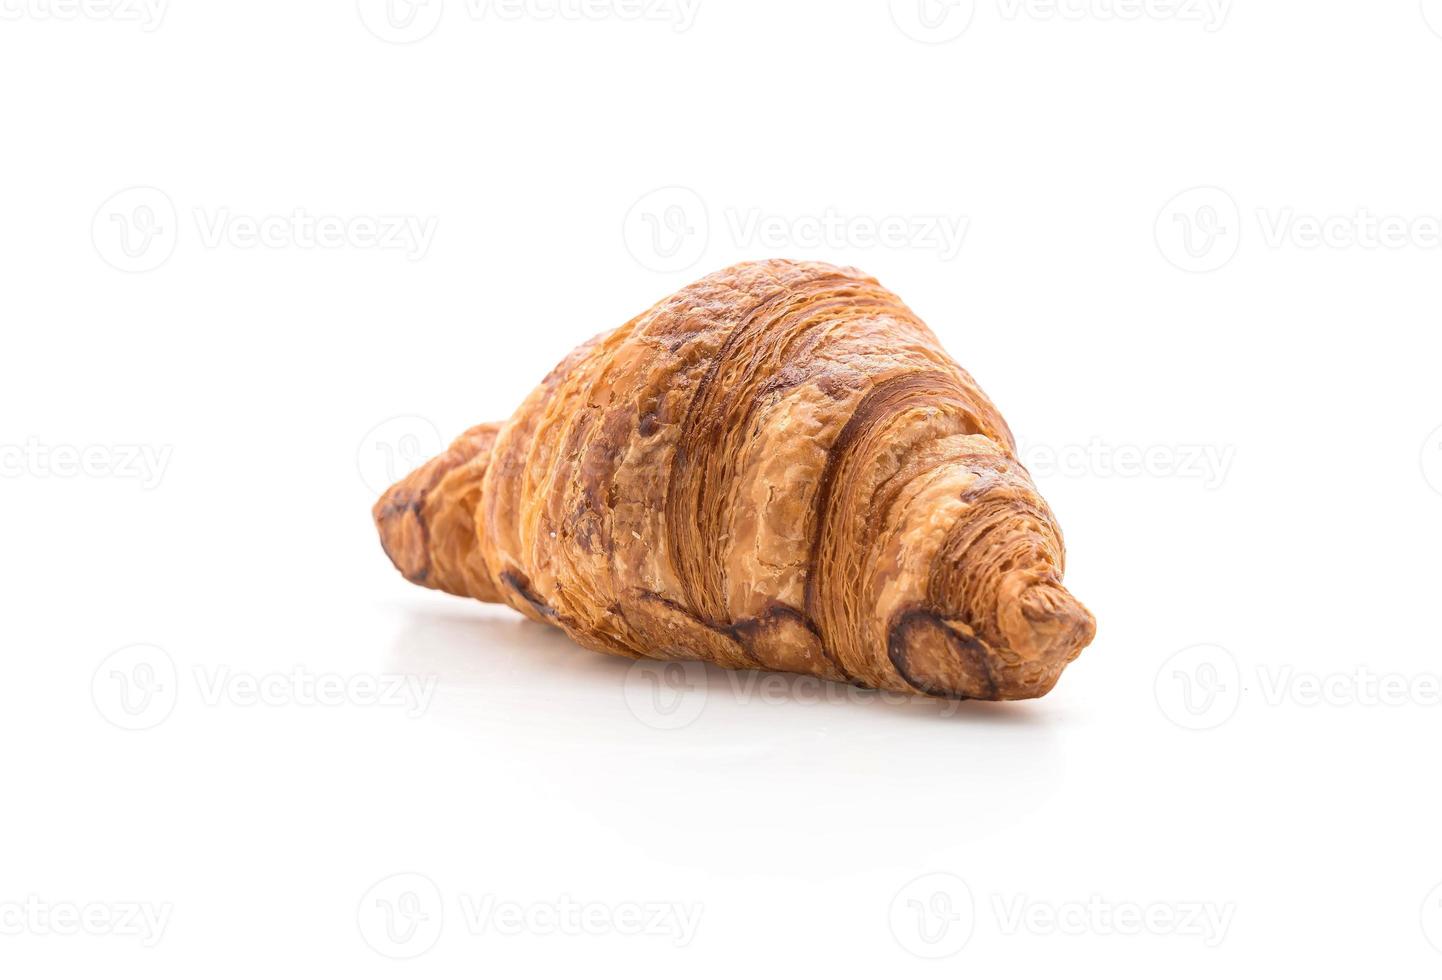 boter croissant op witte achtergrond foto